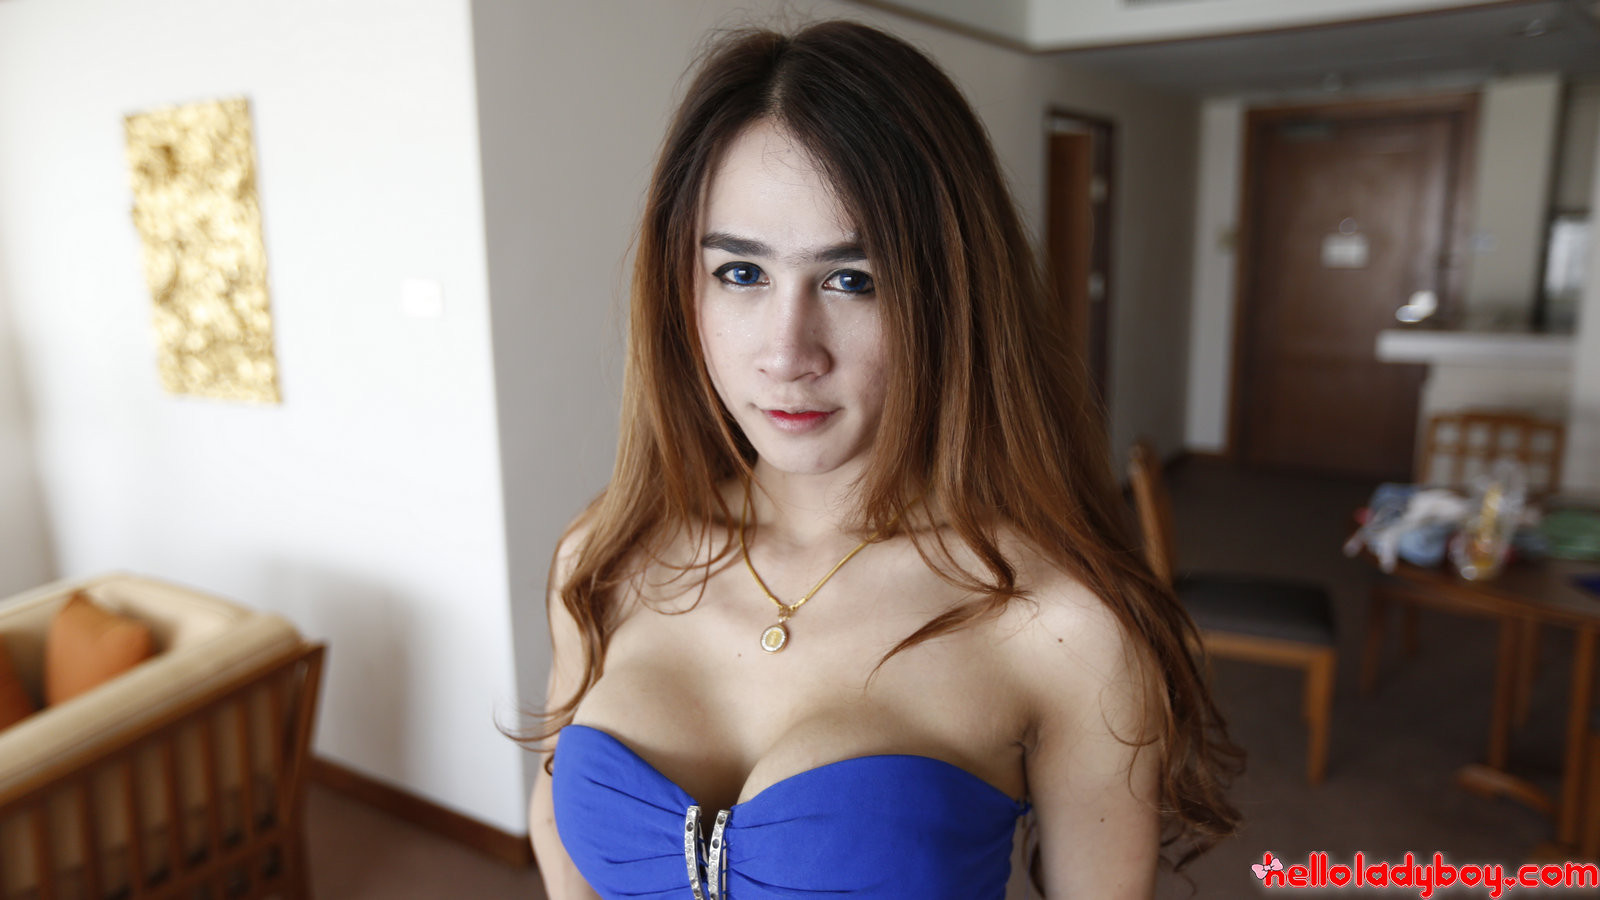 Thai ladyboy with fine untrue knockers and long hair gets facial